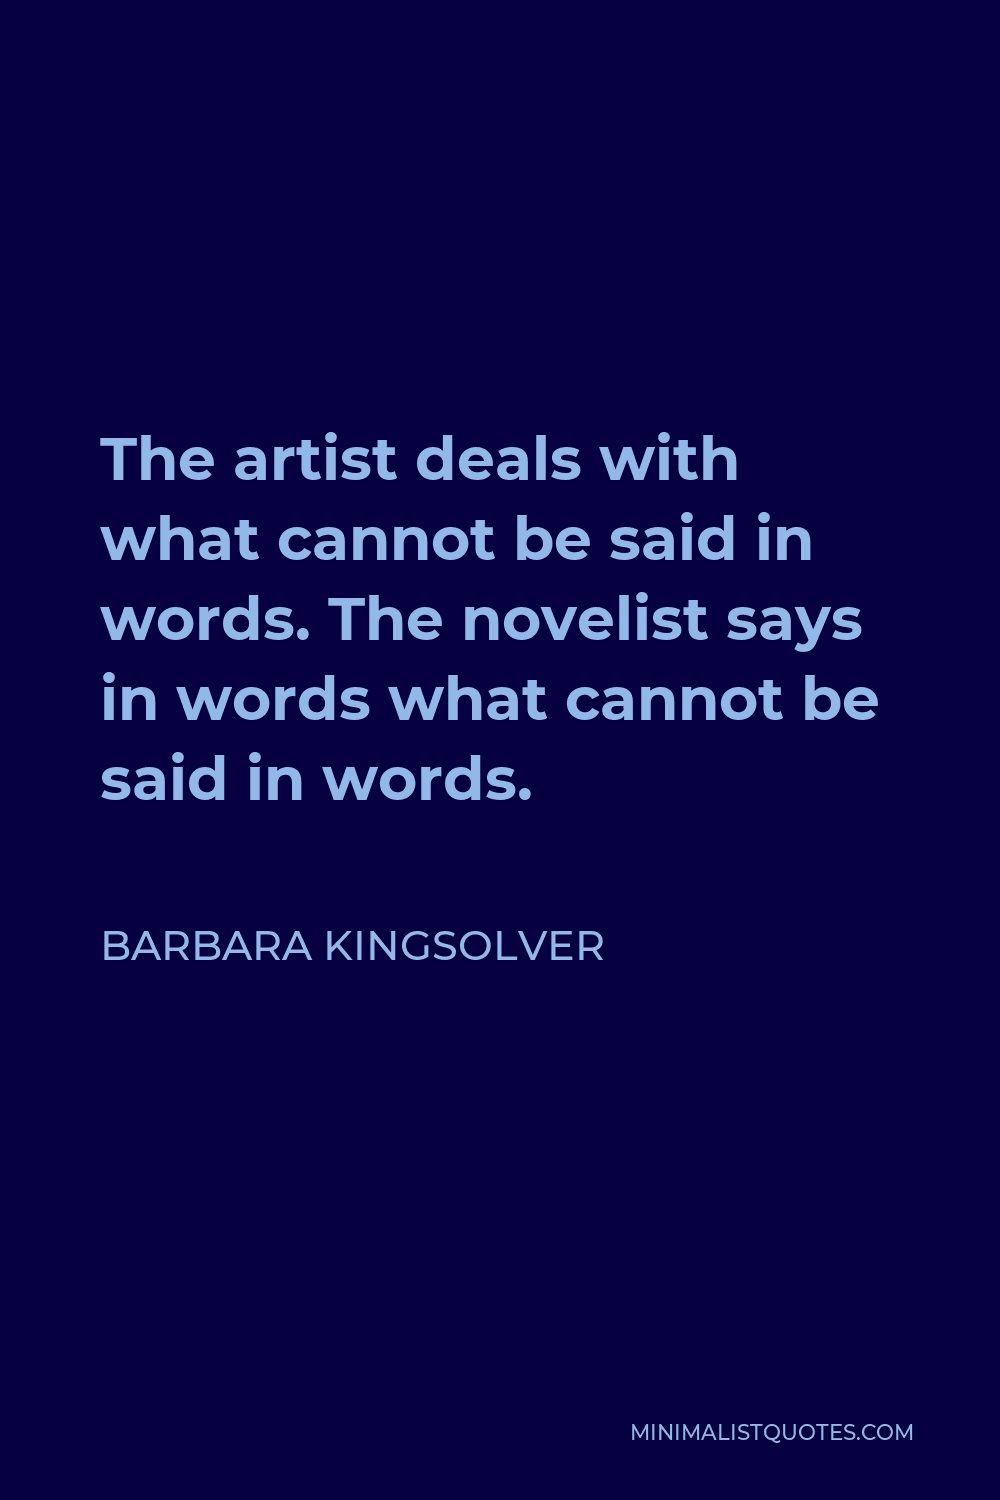 Barbara Kingsolver Quote - The artist deals with what cannot be said in words. The novelist says in words what cannot be said in words.